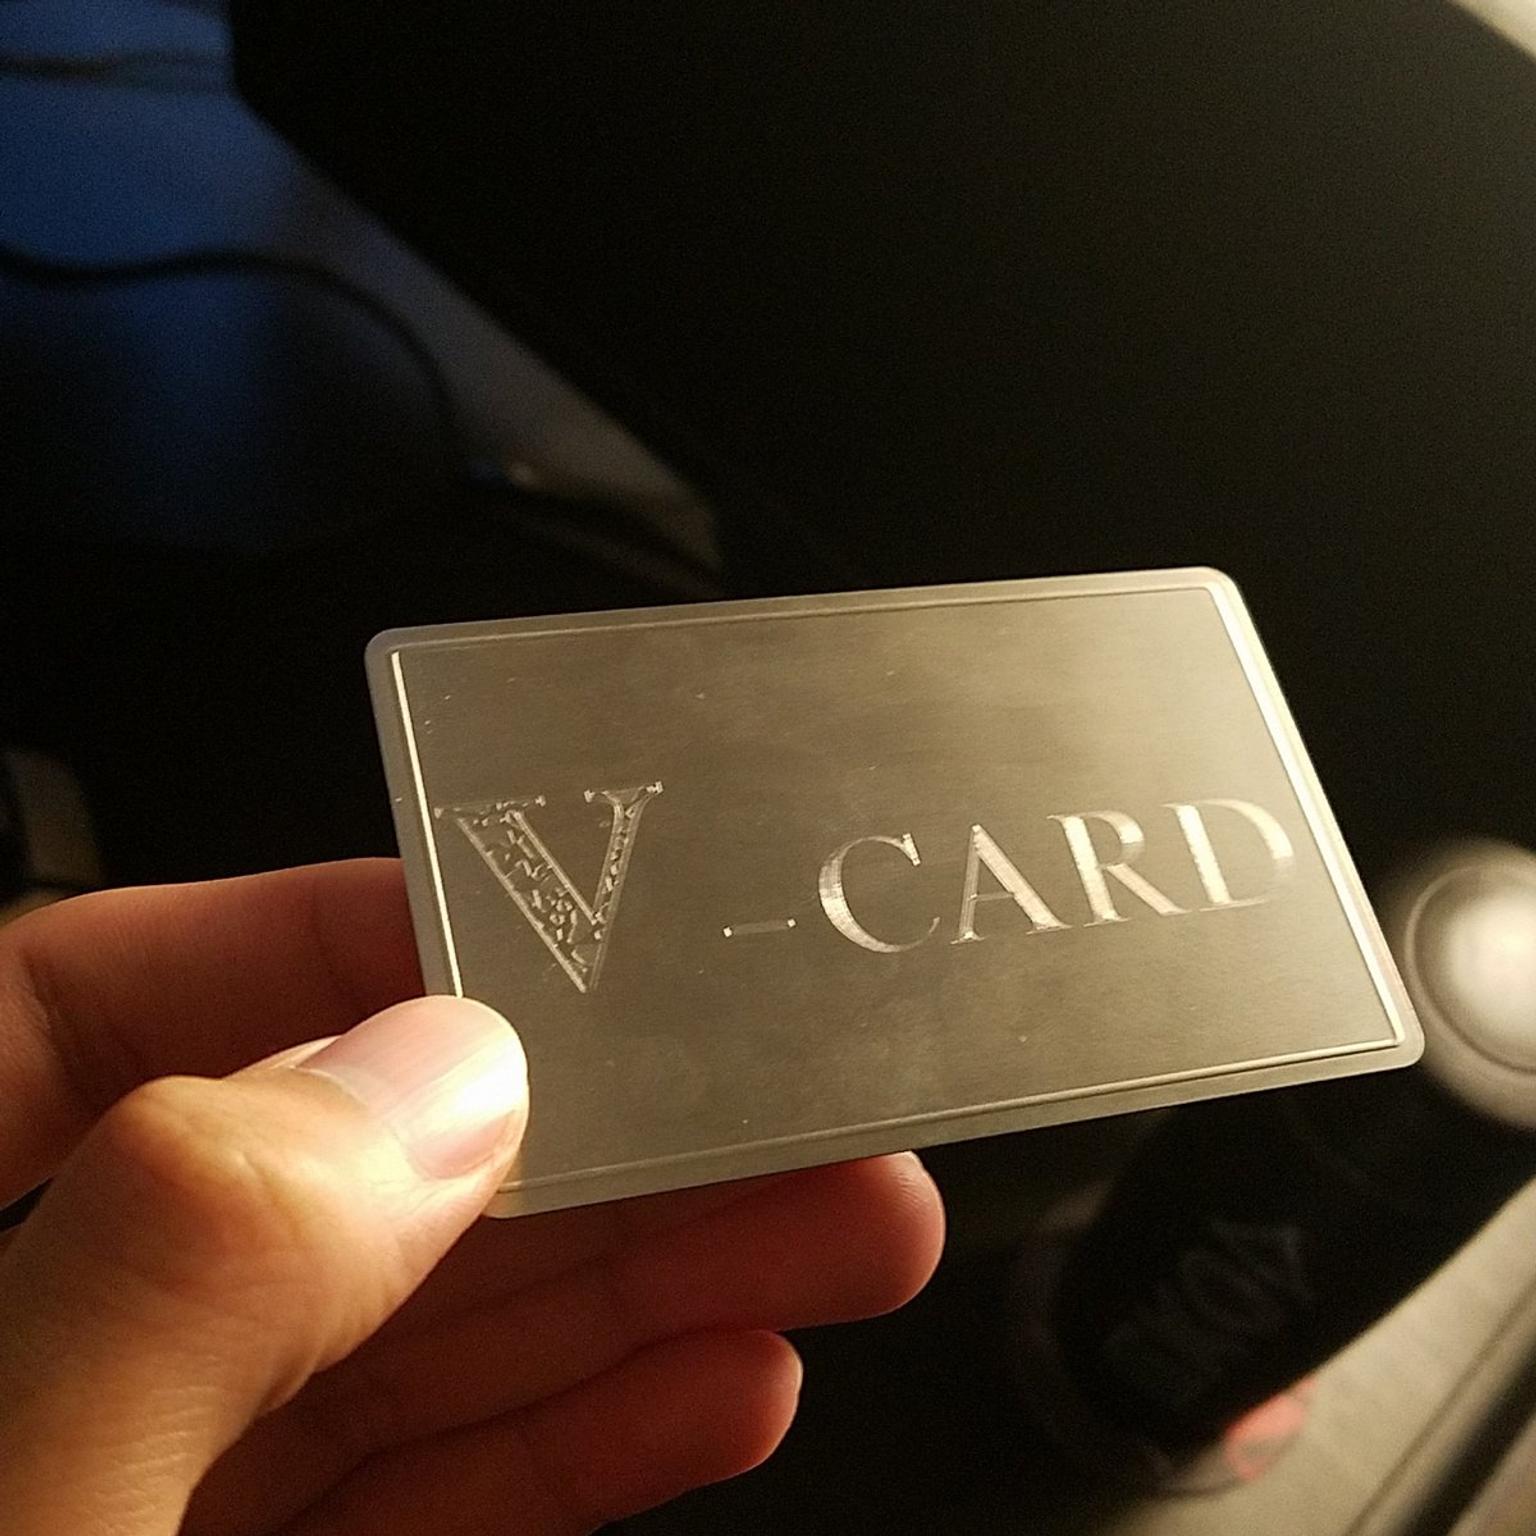 V-CARD Stainless Steel Metal Virginity Card in SE2 London for £9.99 for